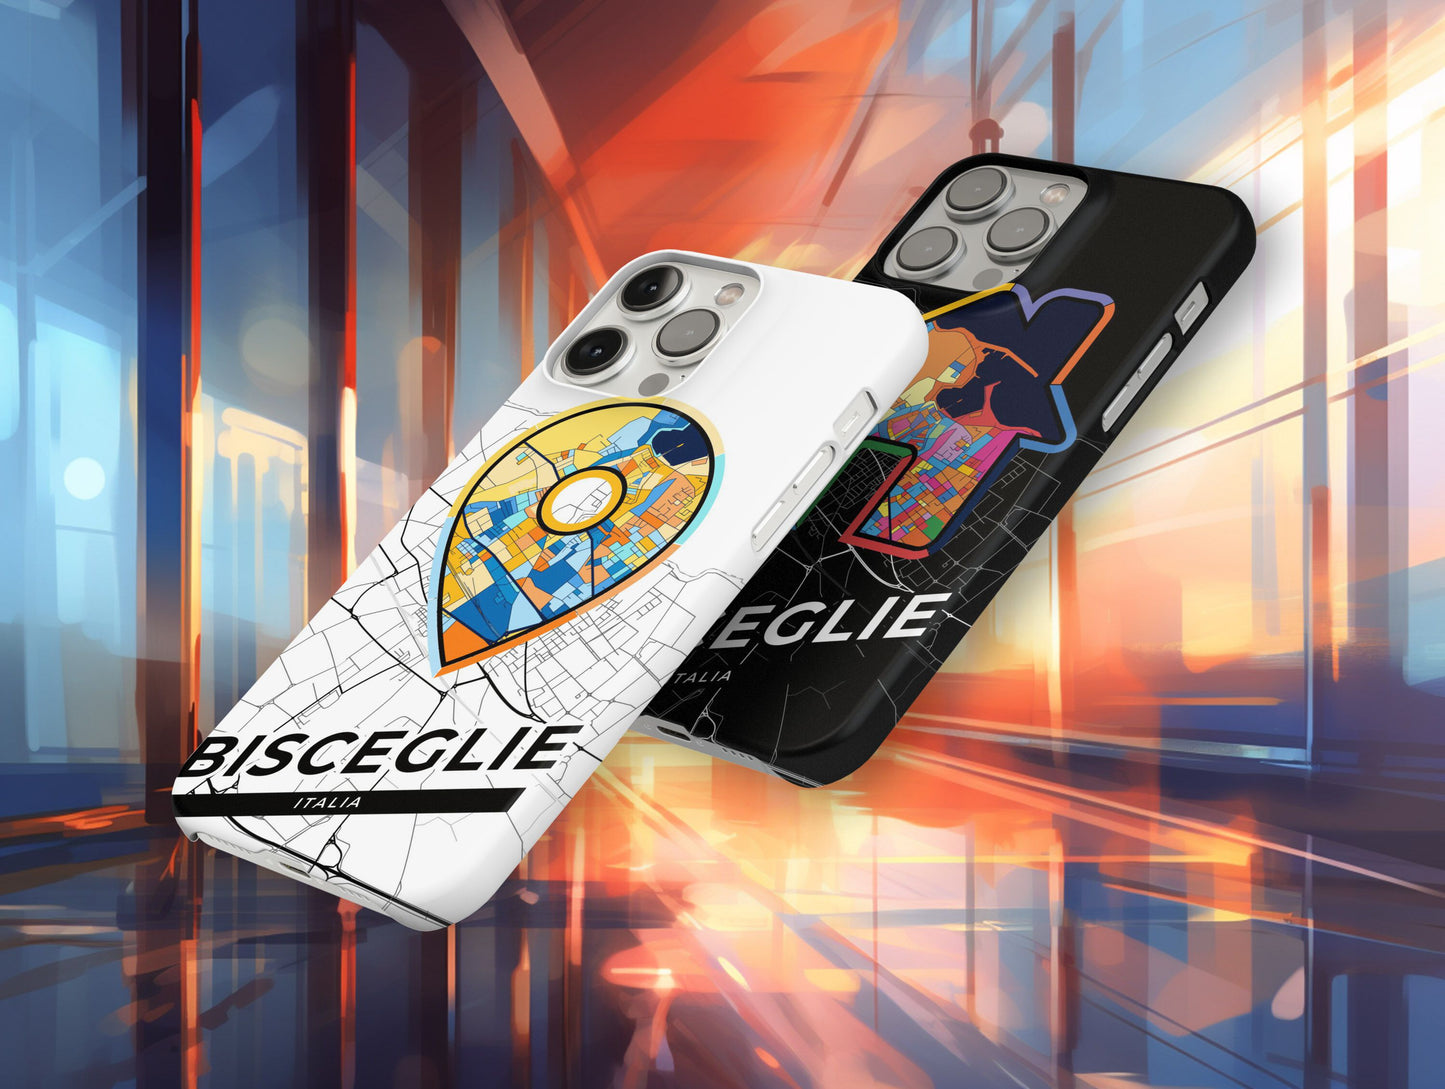 Bisceglie Italy slim phone case with colorful icon. Birthday, wedding or housewarming gift. Couple match cases.